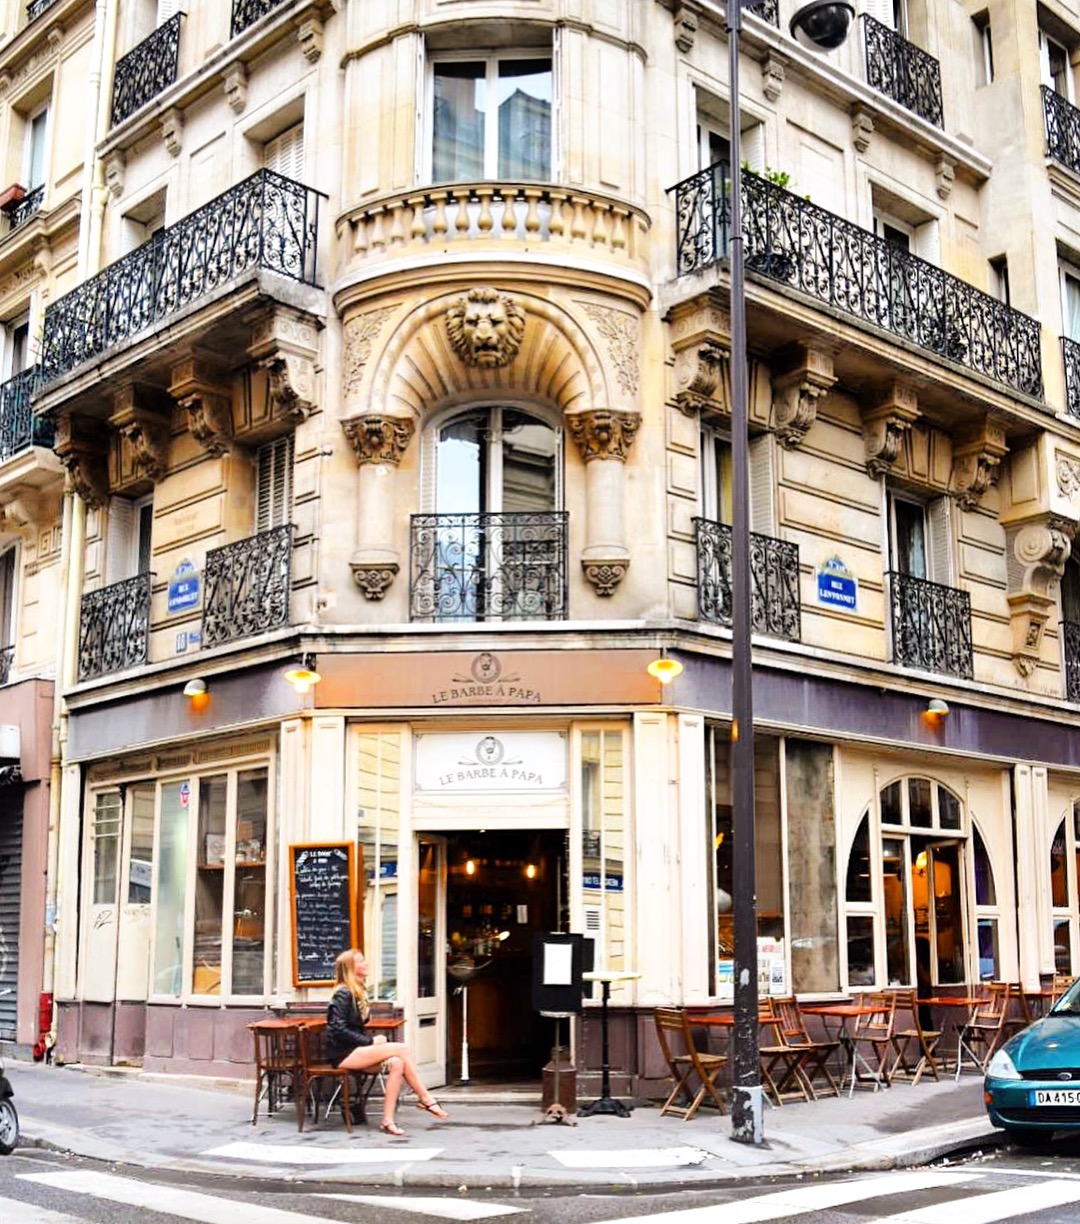 Girl sitting on chair and table out the front of Paris restaurant